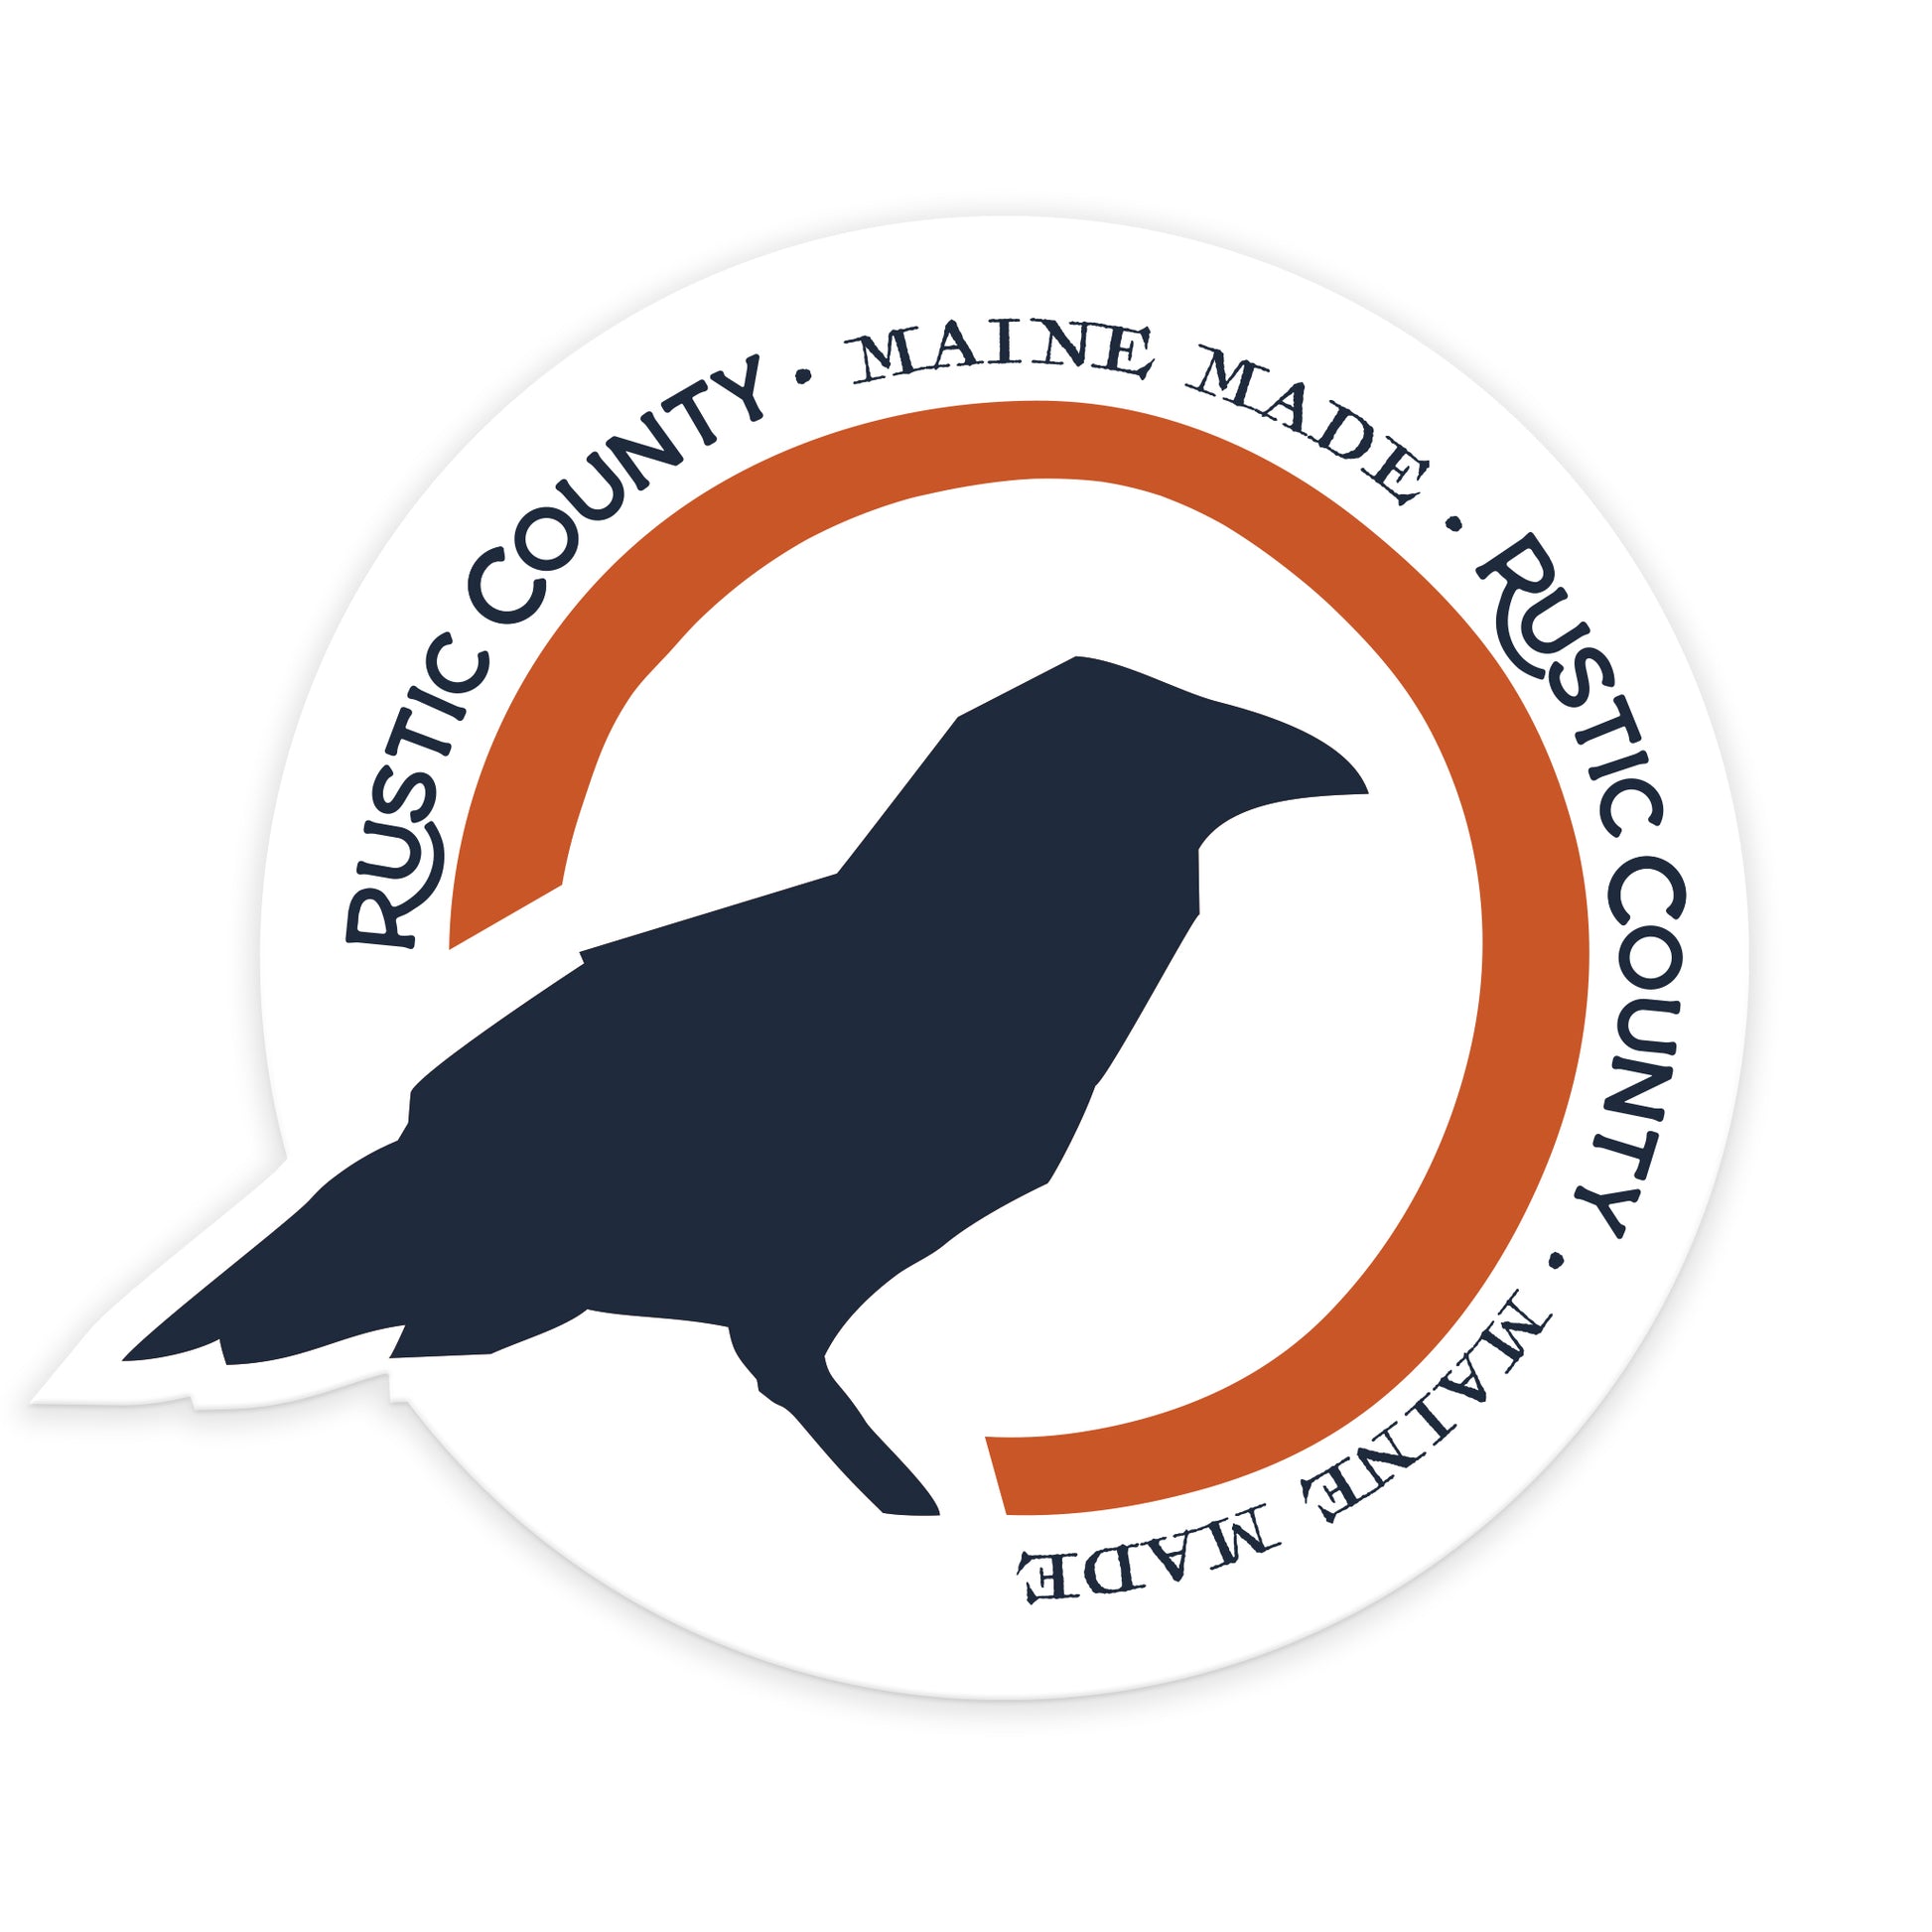 Round sticker featuring a silhouette of a crow at its center with text "Rustic County - Maine Made" encircling it in orange and navy blue, crafted as a die-cut logo sticker.